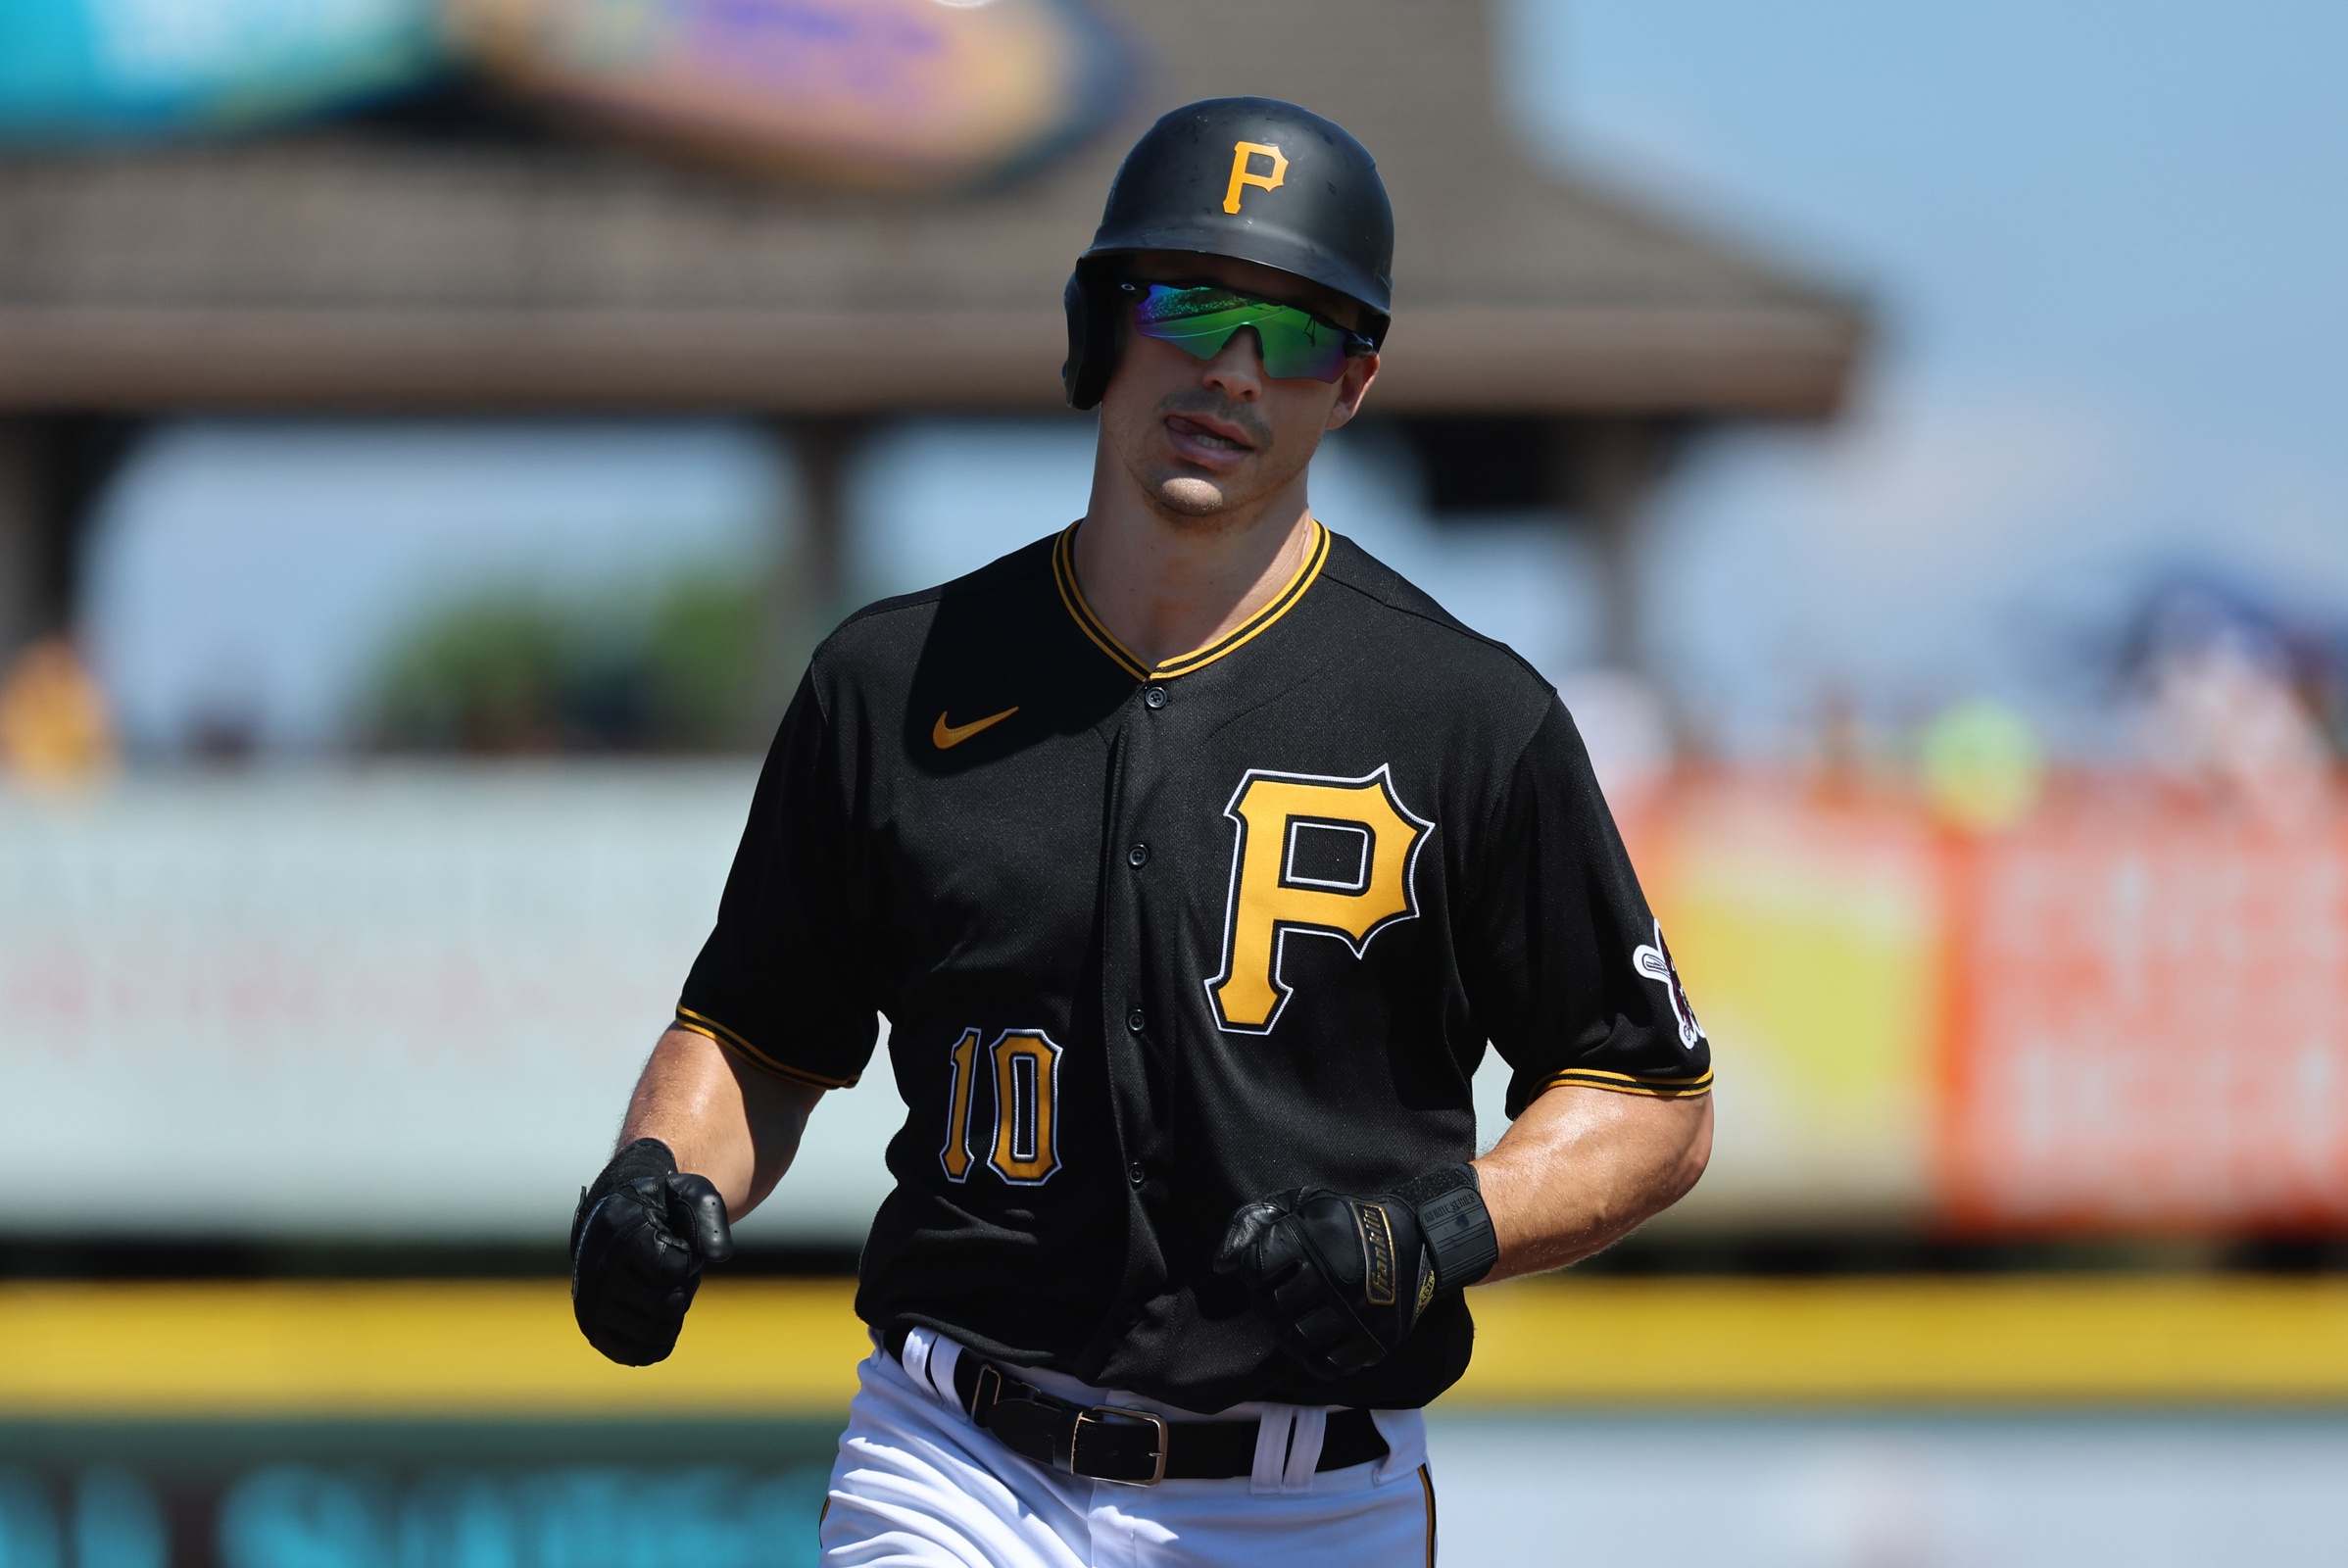 Bob Nutting was key to Bryan Reynolds staying with Pittsburgh Pirates